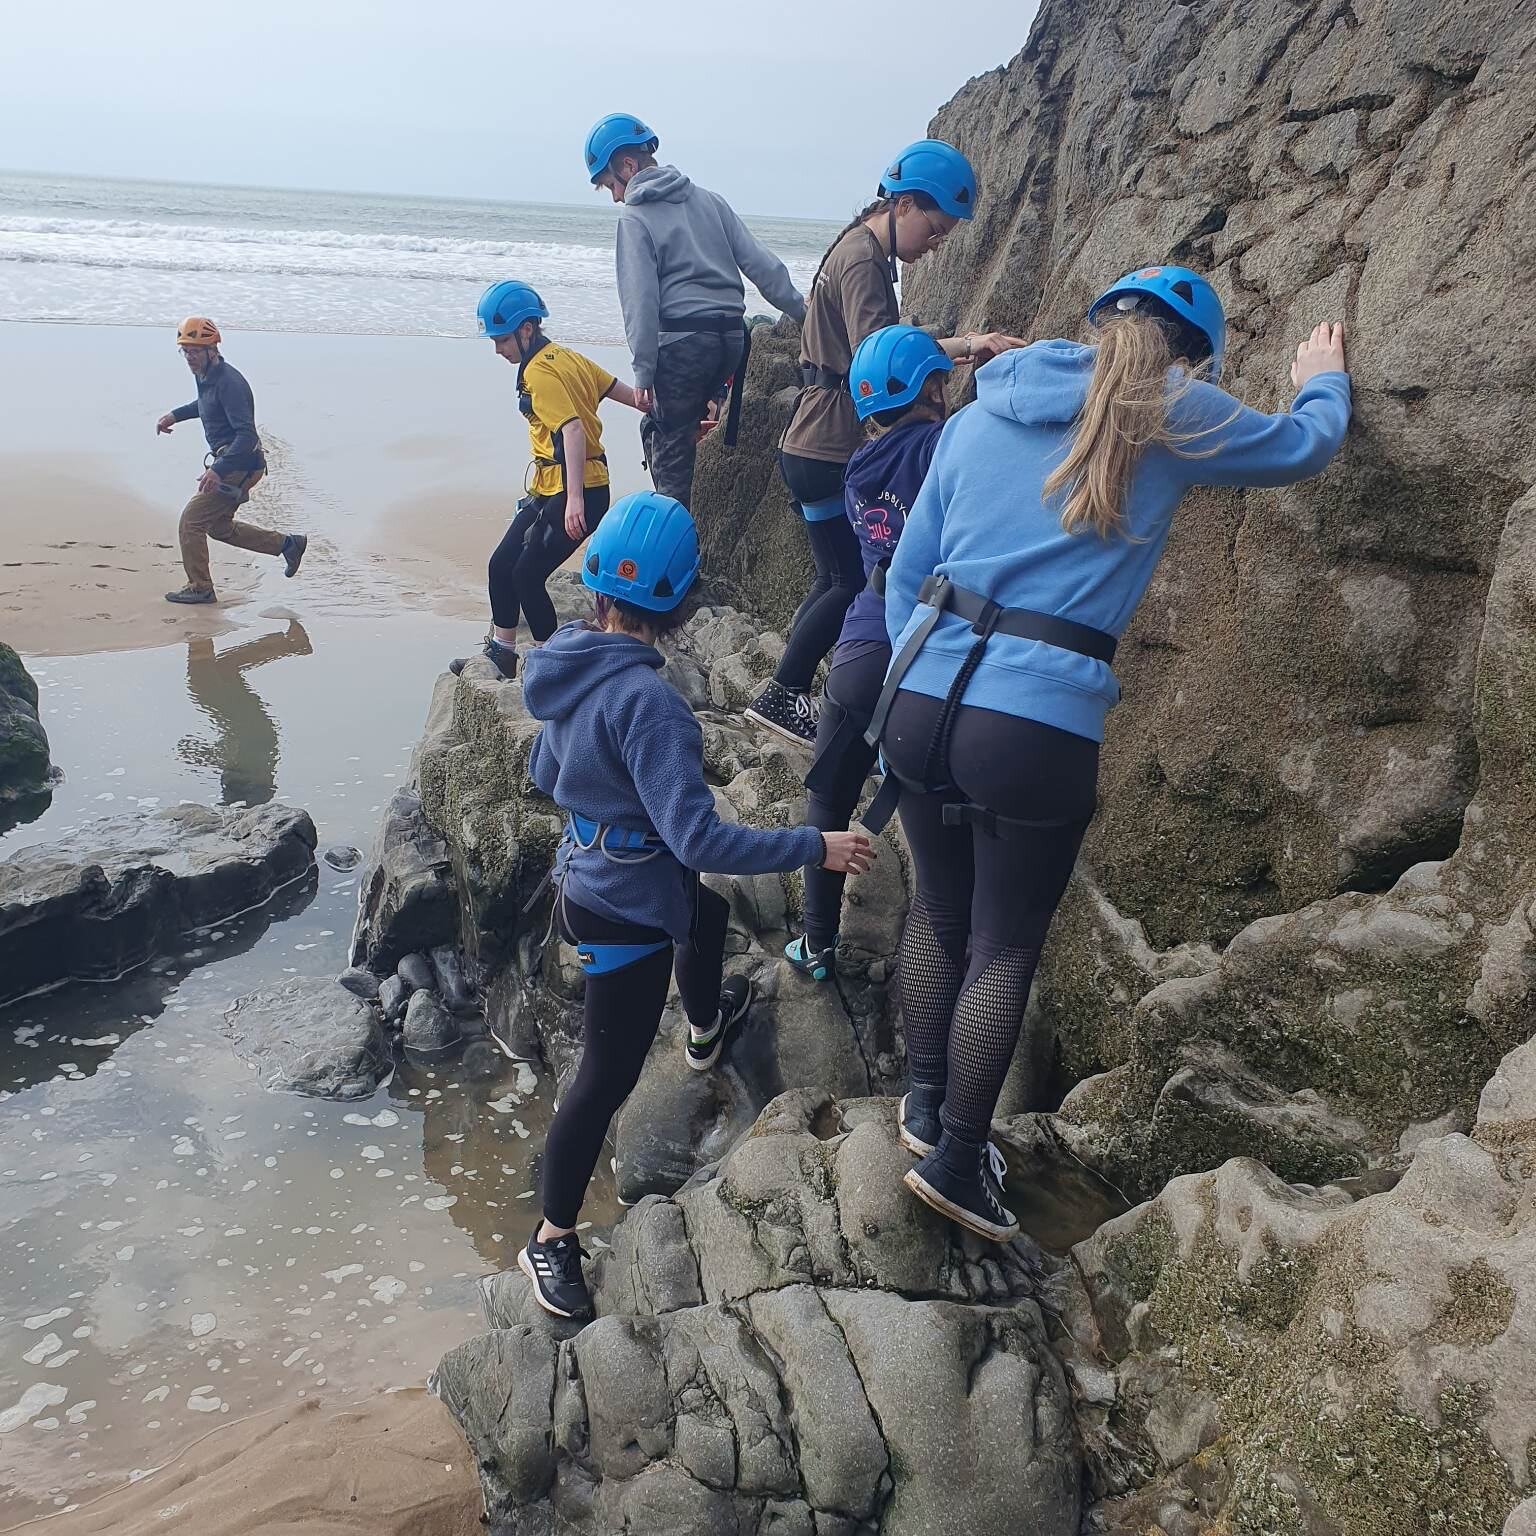 Some of our recent adventures exploring the rocks and getting ready to climb. We offer bespoke adventure/team building days to groups of all ages and abilities. Get in touch if you want to find out more (https://www.ptuac.com/contact) #adventures #cl